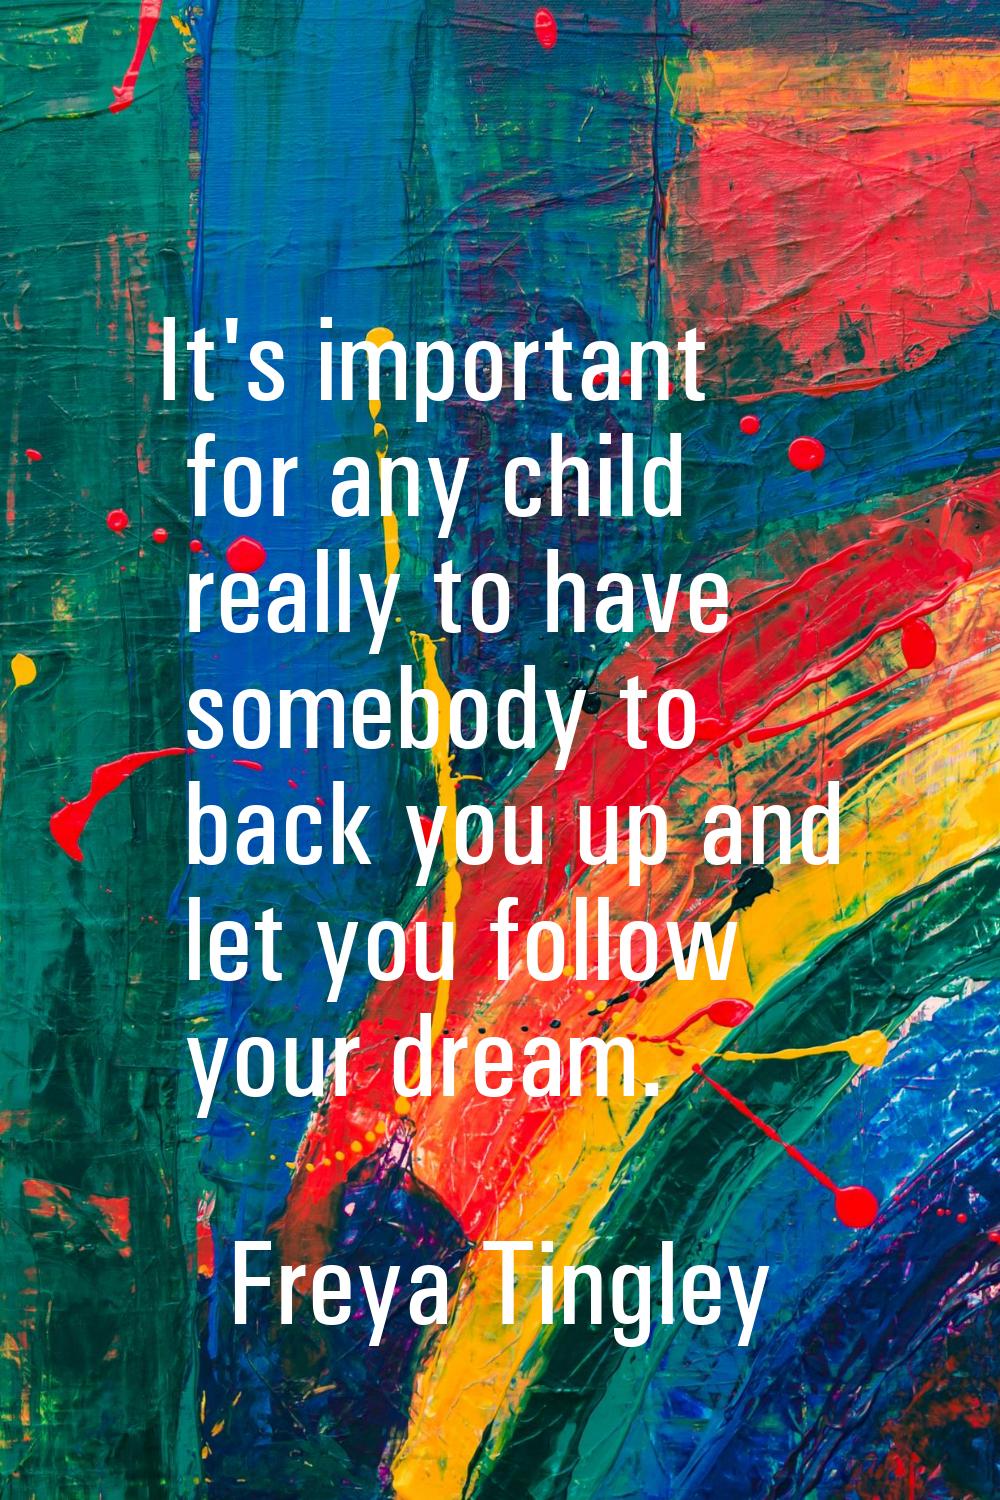 It's important for any child really to have somebody to back you up and let you follow your dream.